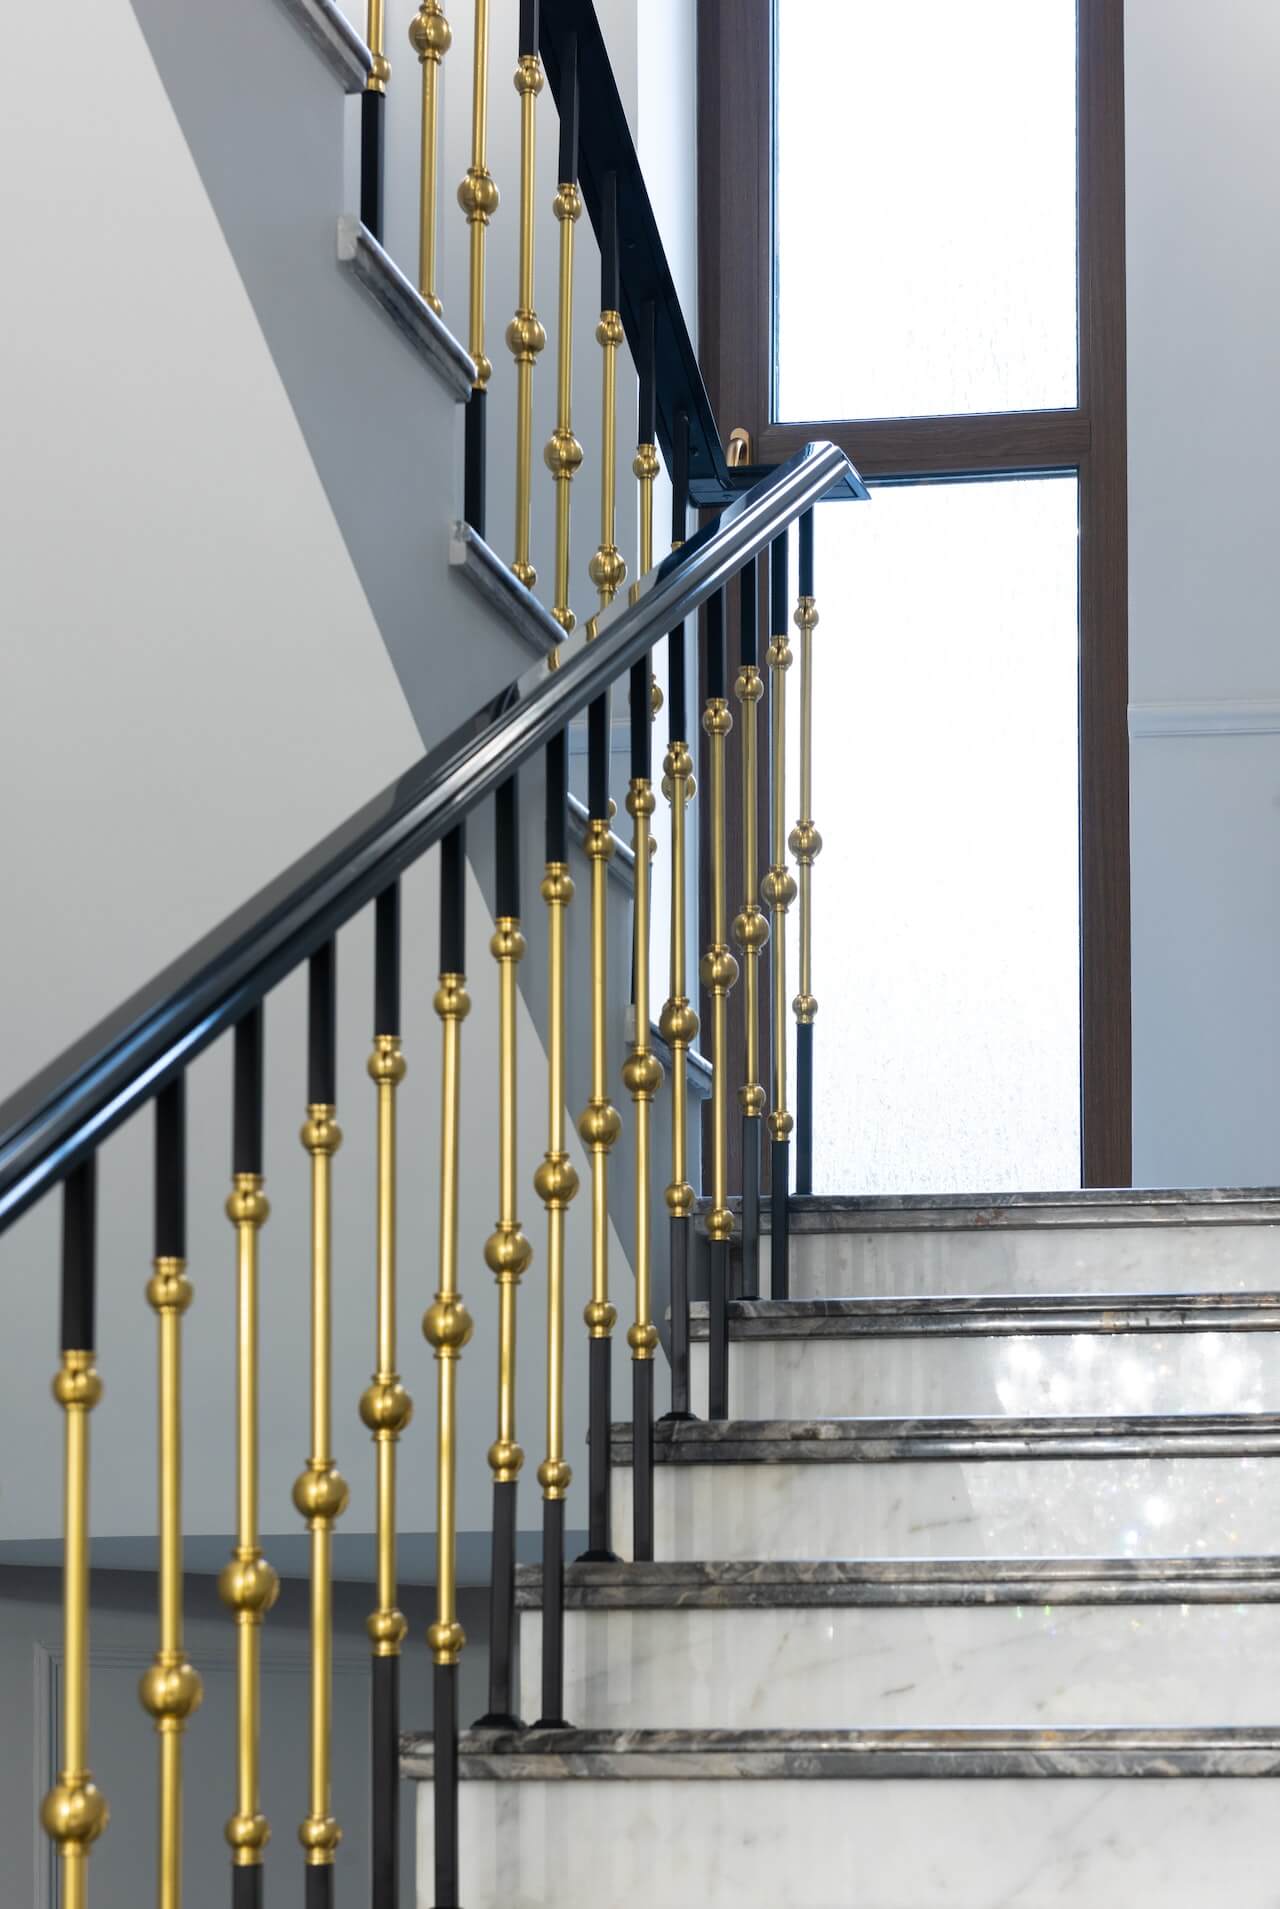 An elegant ornate railing staircase with intricate ironwork, showcasing a timeless and grand design